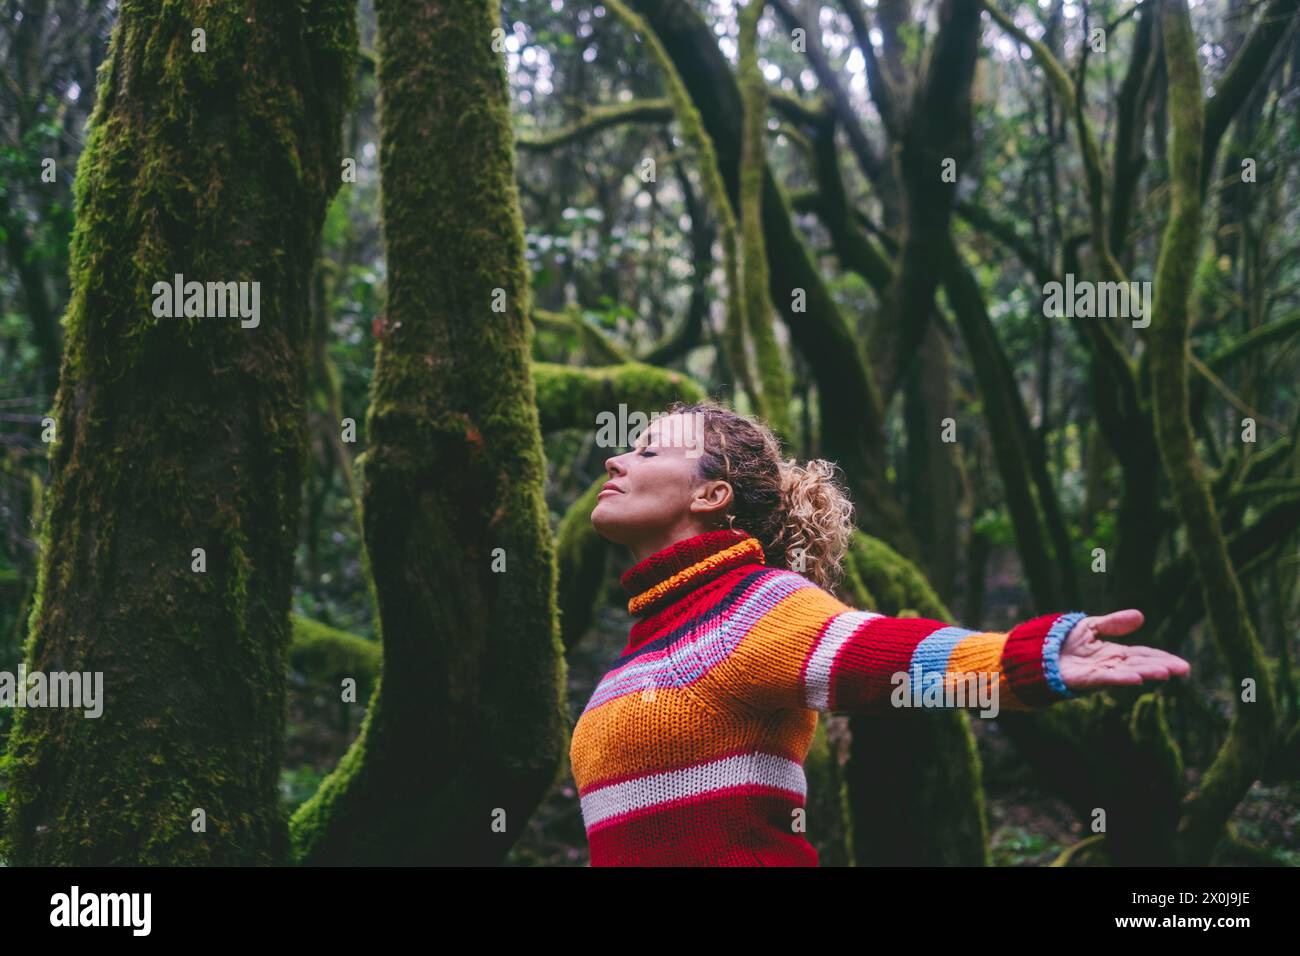 Side view of happy tourist enjoying green forest woods and trees opening arms and outstretching with smile expression and serene wellbeing. Healthy nature lifestyle people outdoors leisure adventure Stock Photo